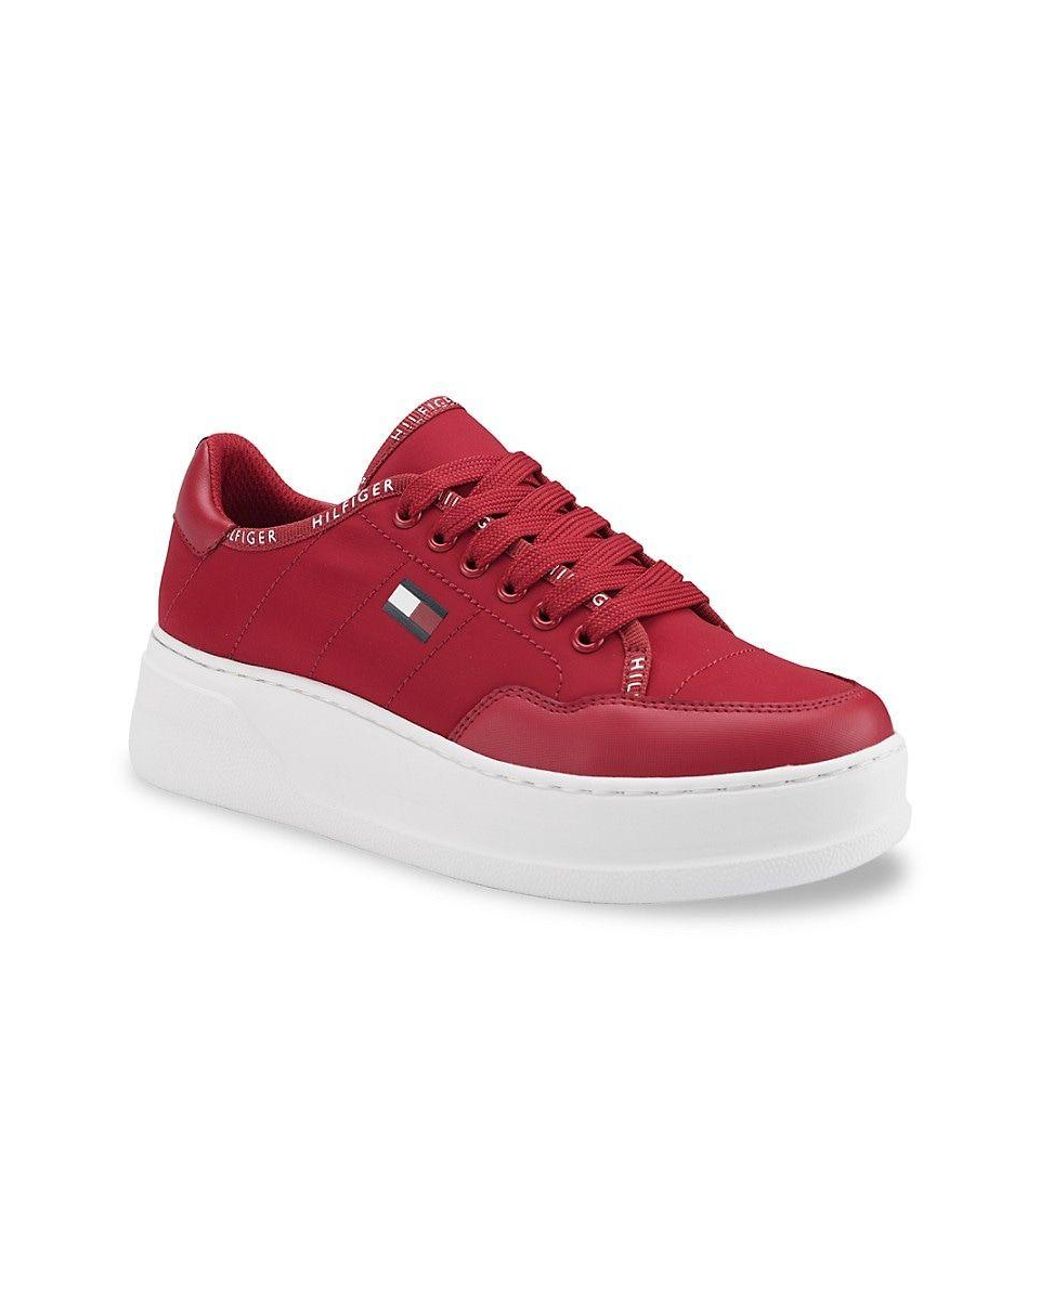 Tommy Hilfiger Logo Platform Sneakers in Red | Lyst